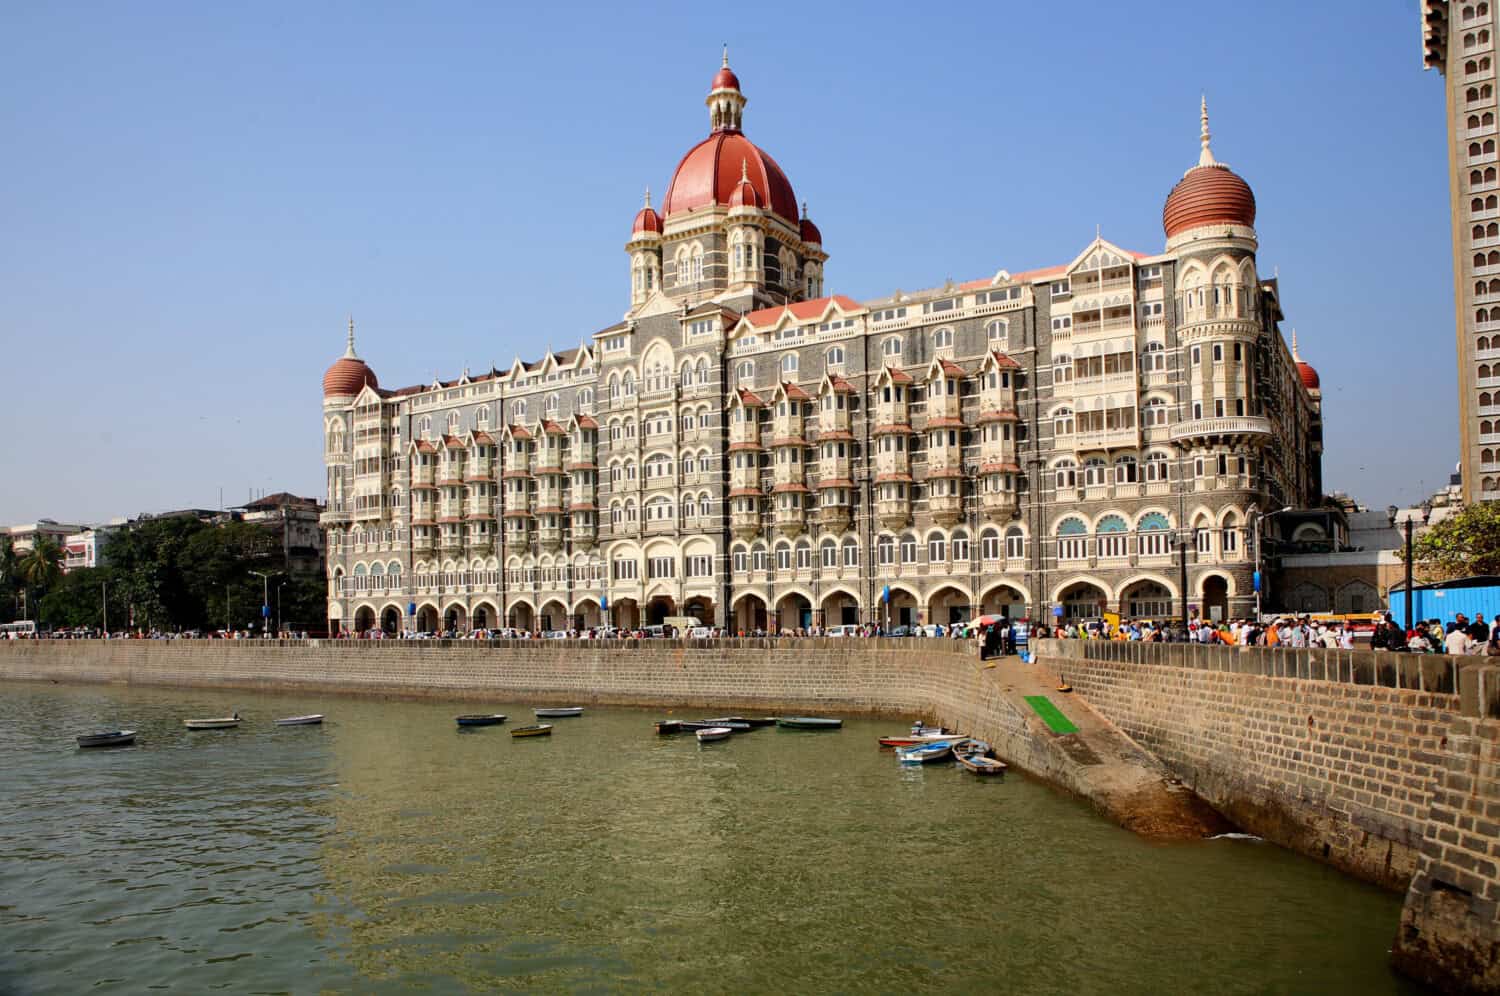 Building TAJ HOTEL in the Victorian style on coast of the Bombay gulf. India. Bombay